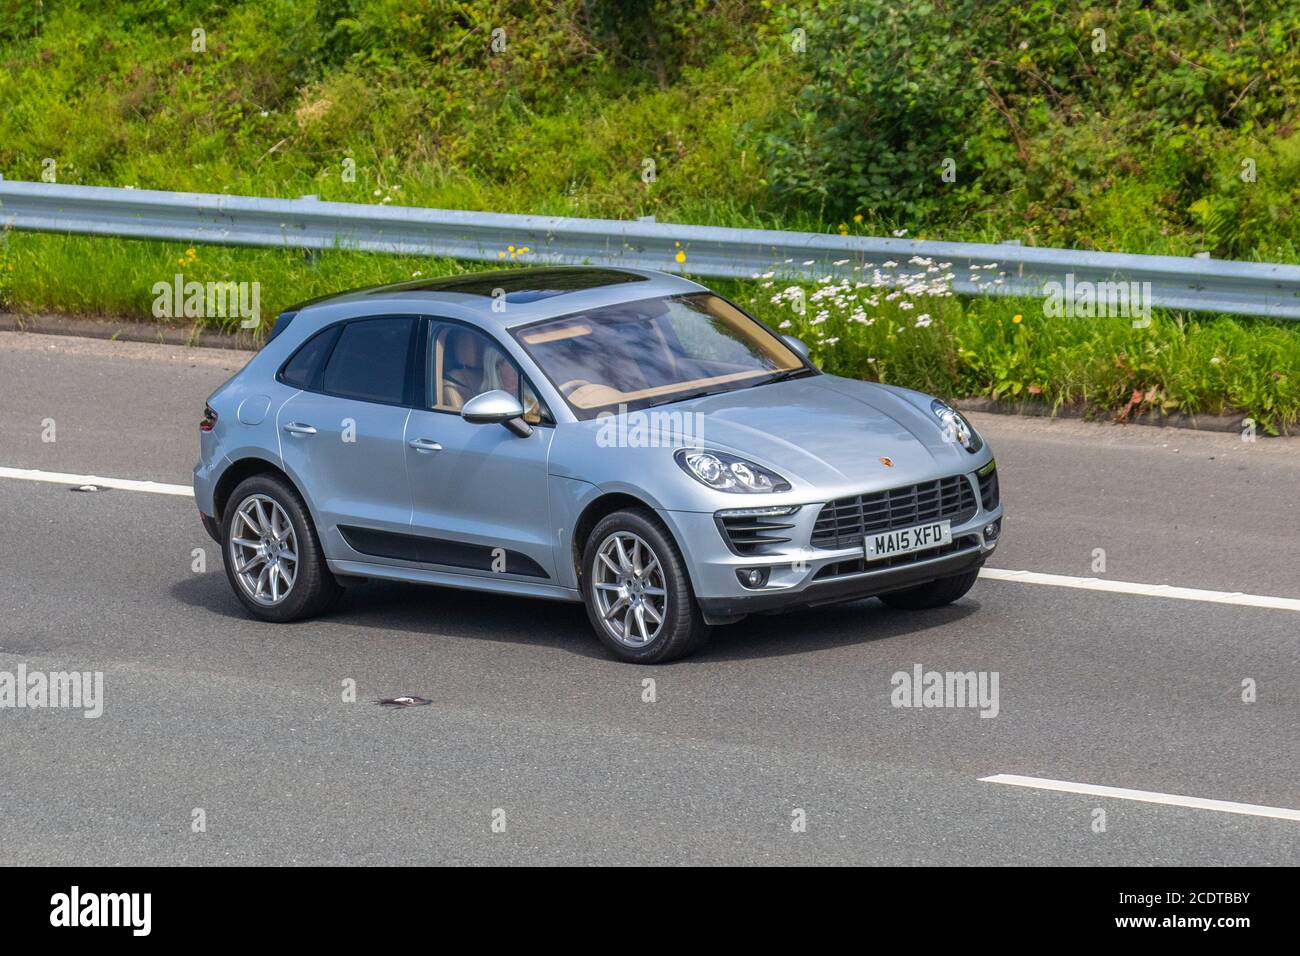 2015 silver Porsche Macan S S-A; Vehicular traffic moving vehicles, cars driving vehicle on UK roads, motors, motoring on the M6 motorway highway network. Stock Photo